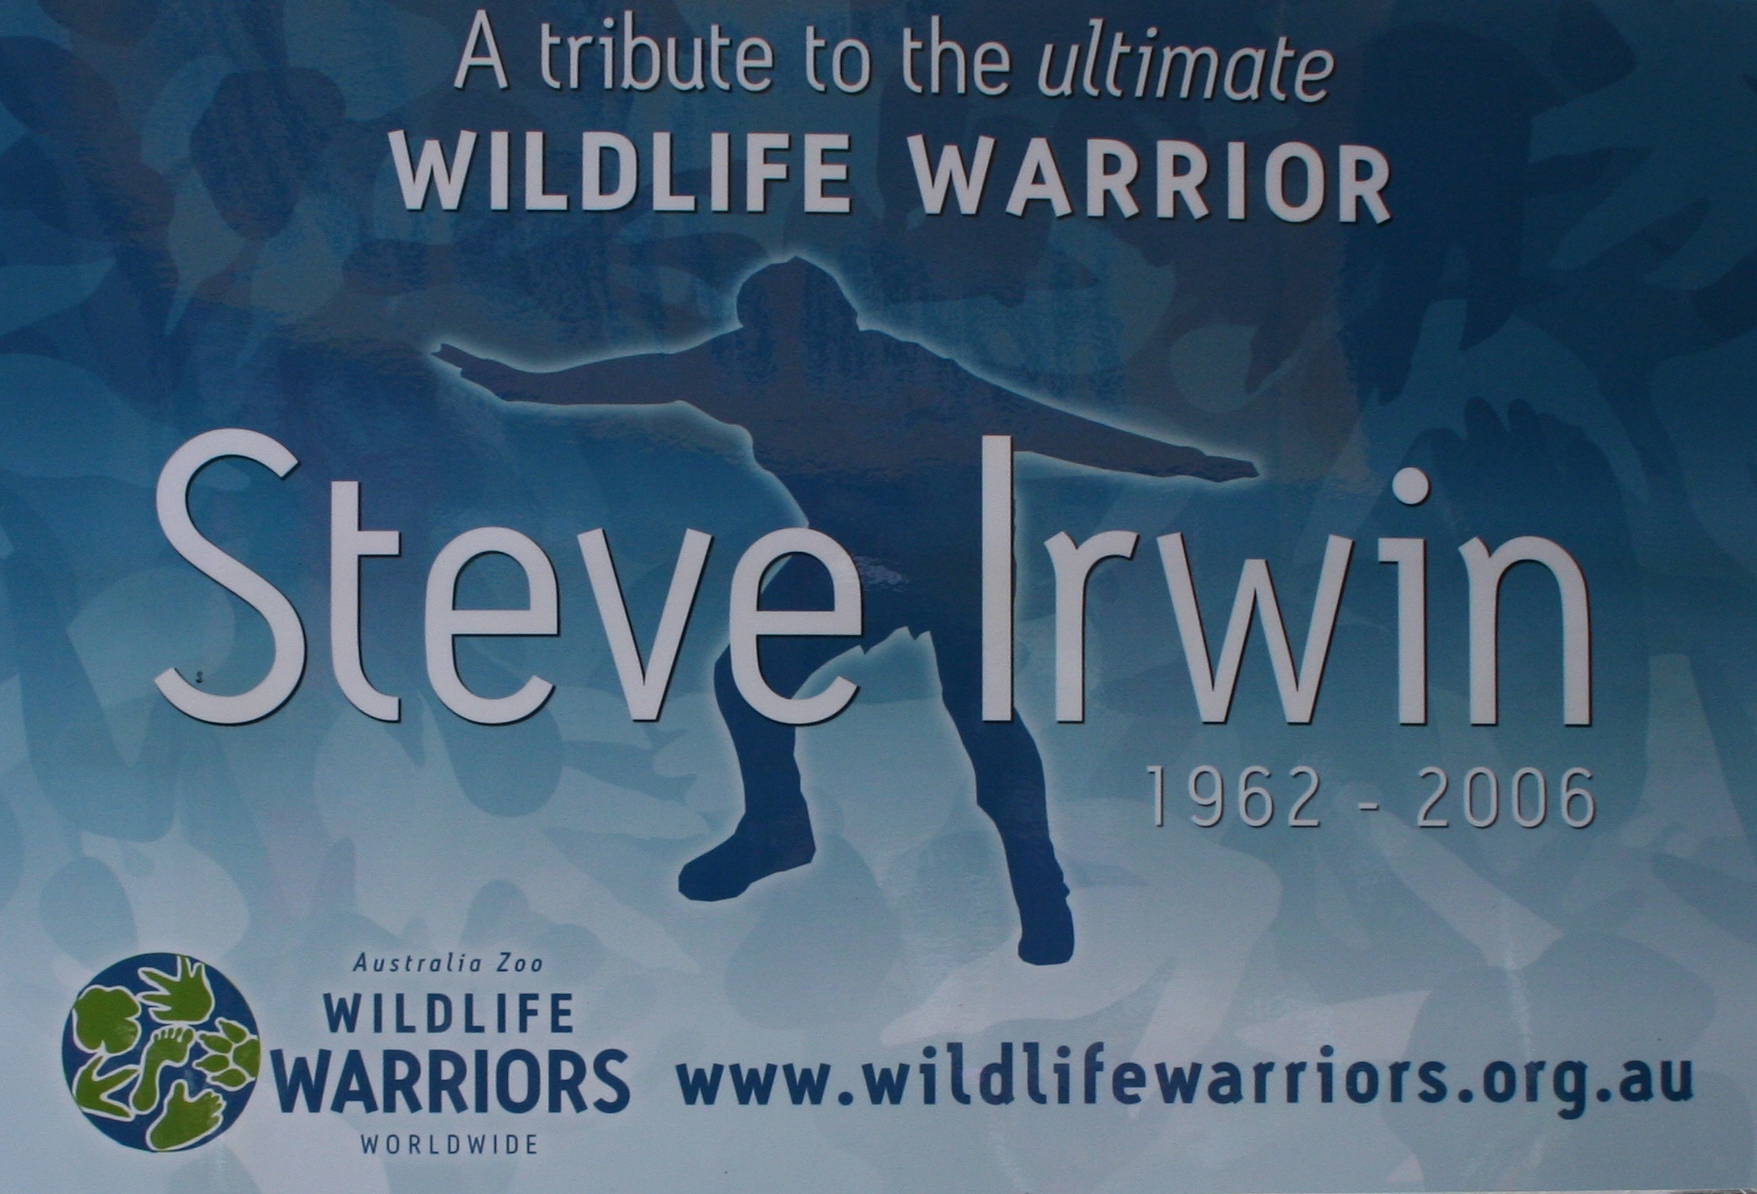 A tribute to the ultimate Wildlife Warrior, Steve Irwin.  Photo taken by Chrissy Layton, AusNotebook Music & Creative.